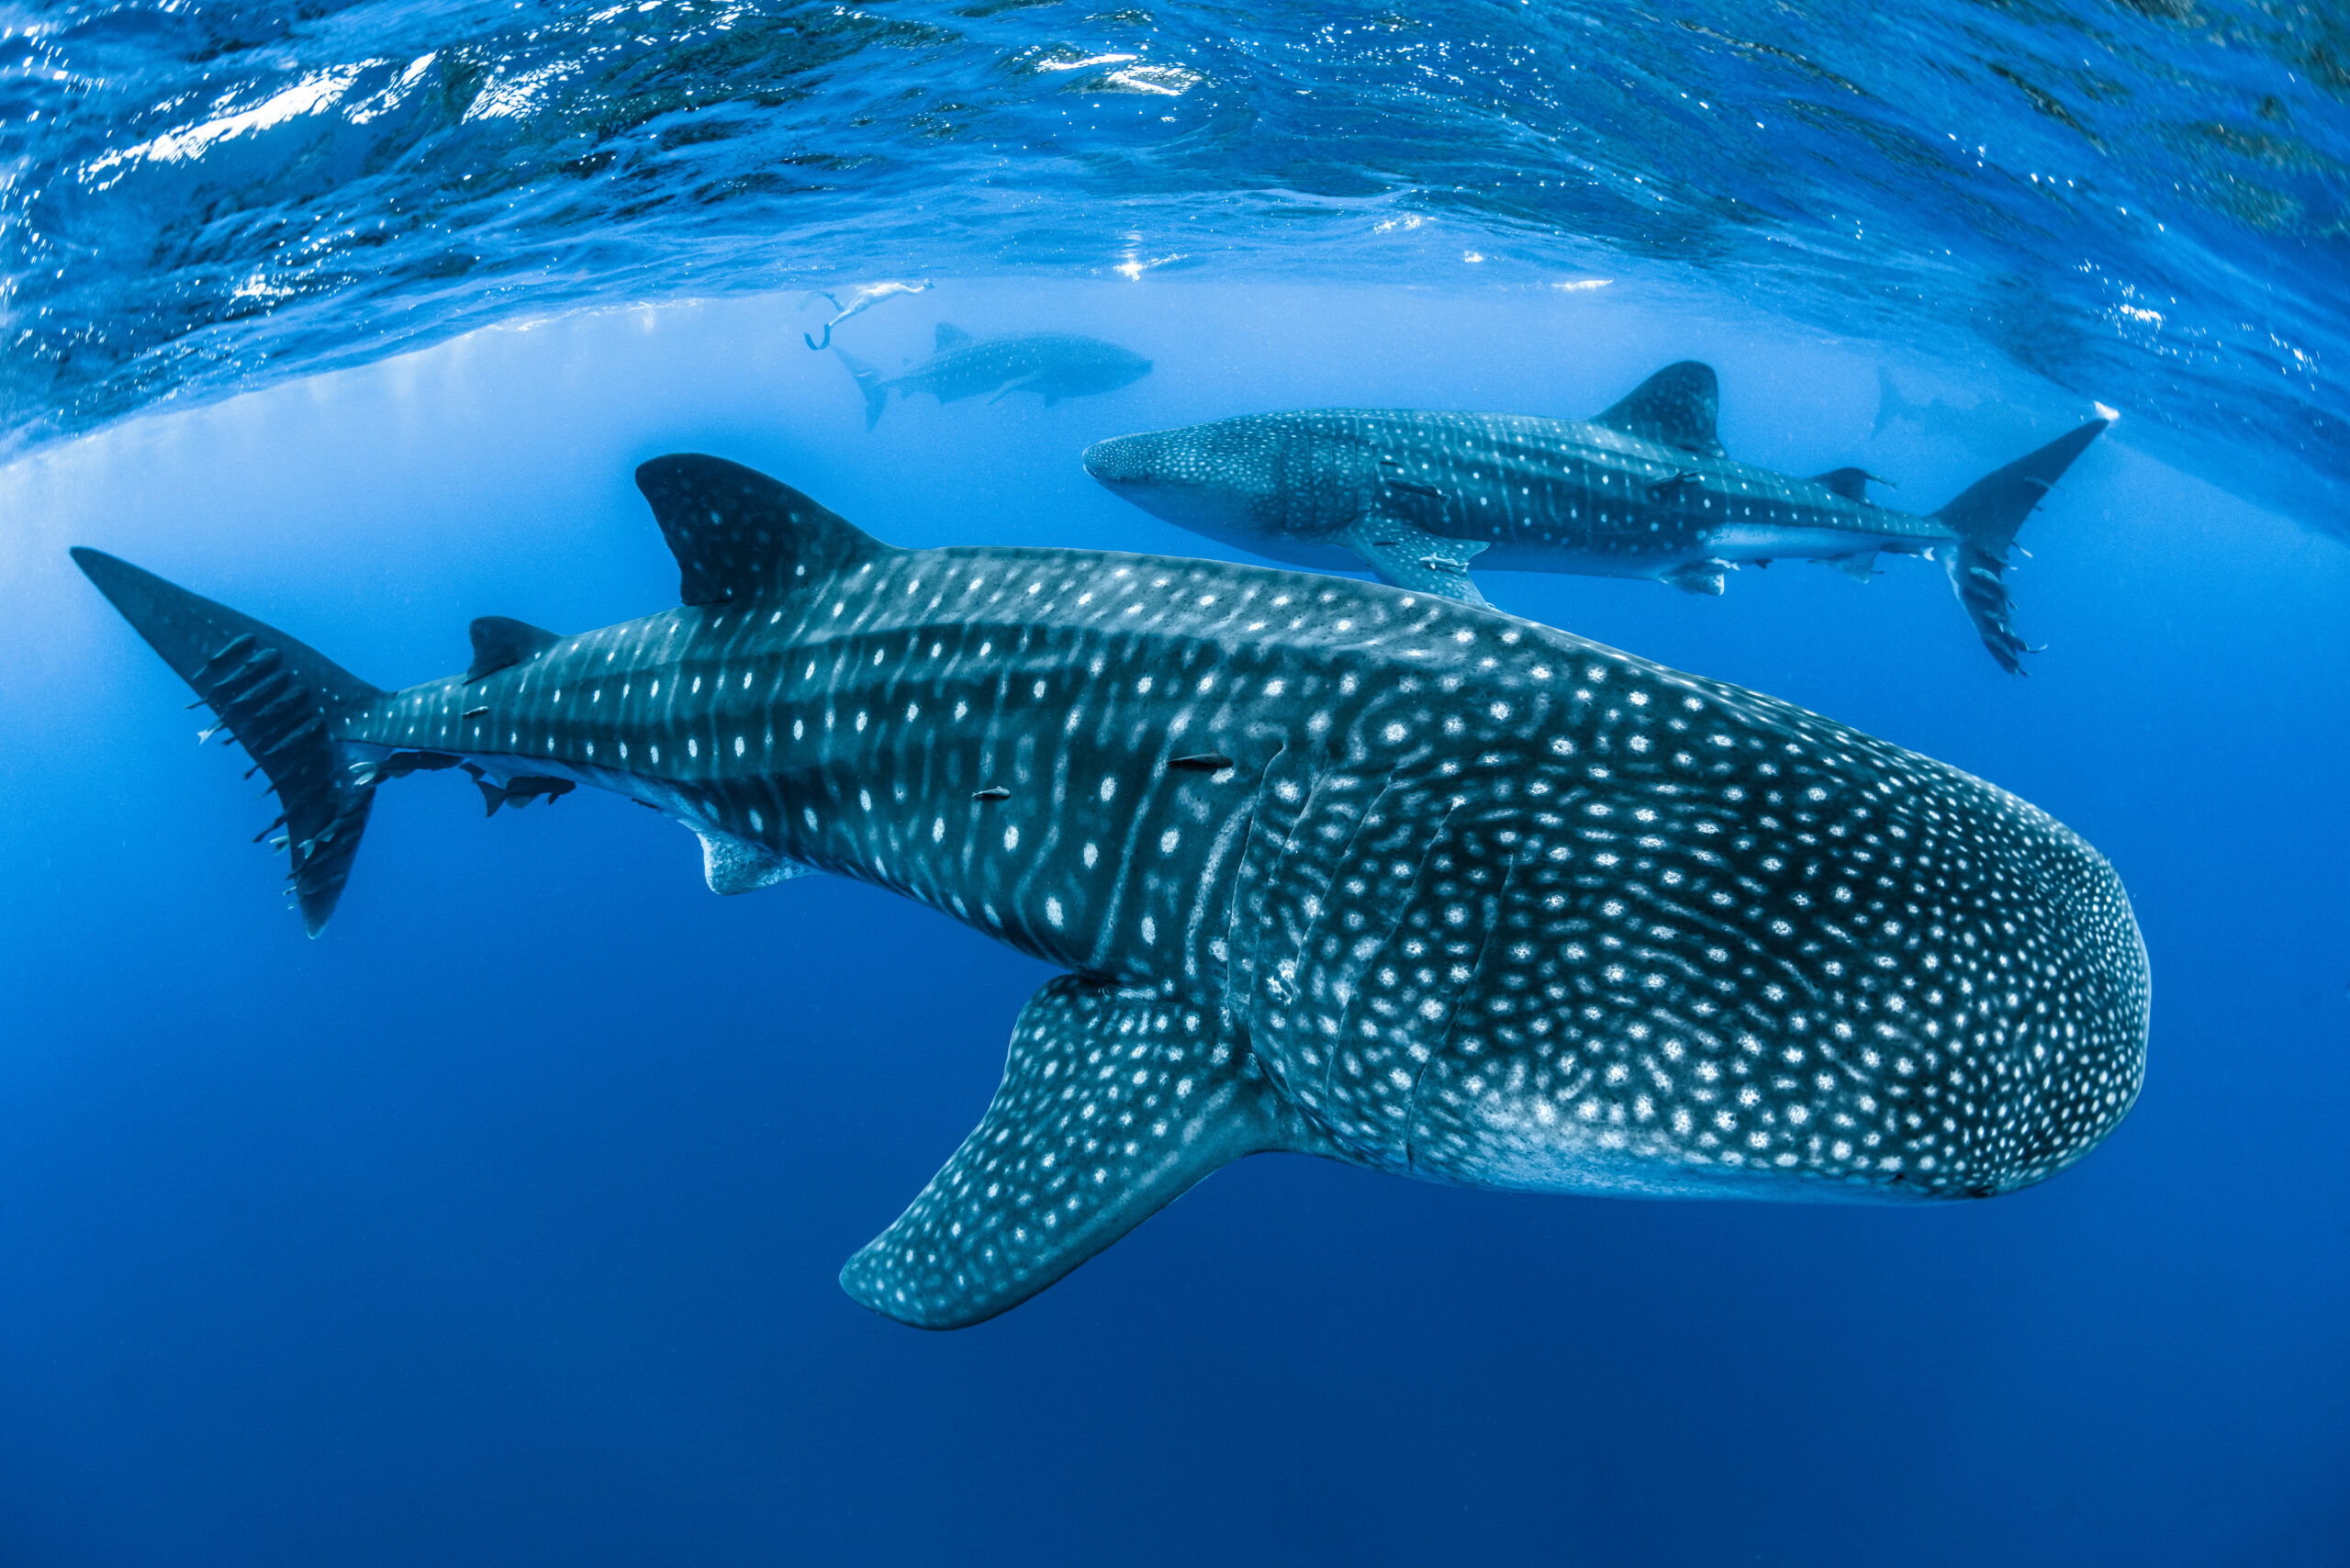 A Whale Shark swimming in clear seas with multiple sharks seen in distance